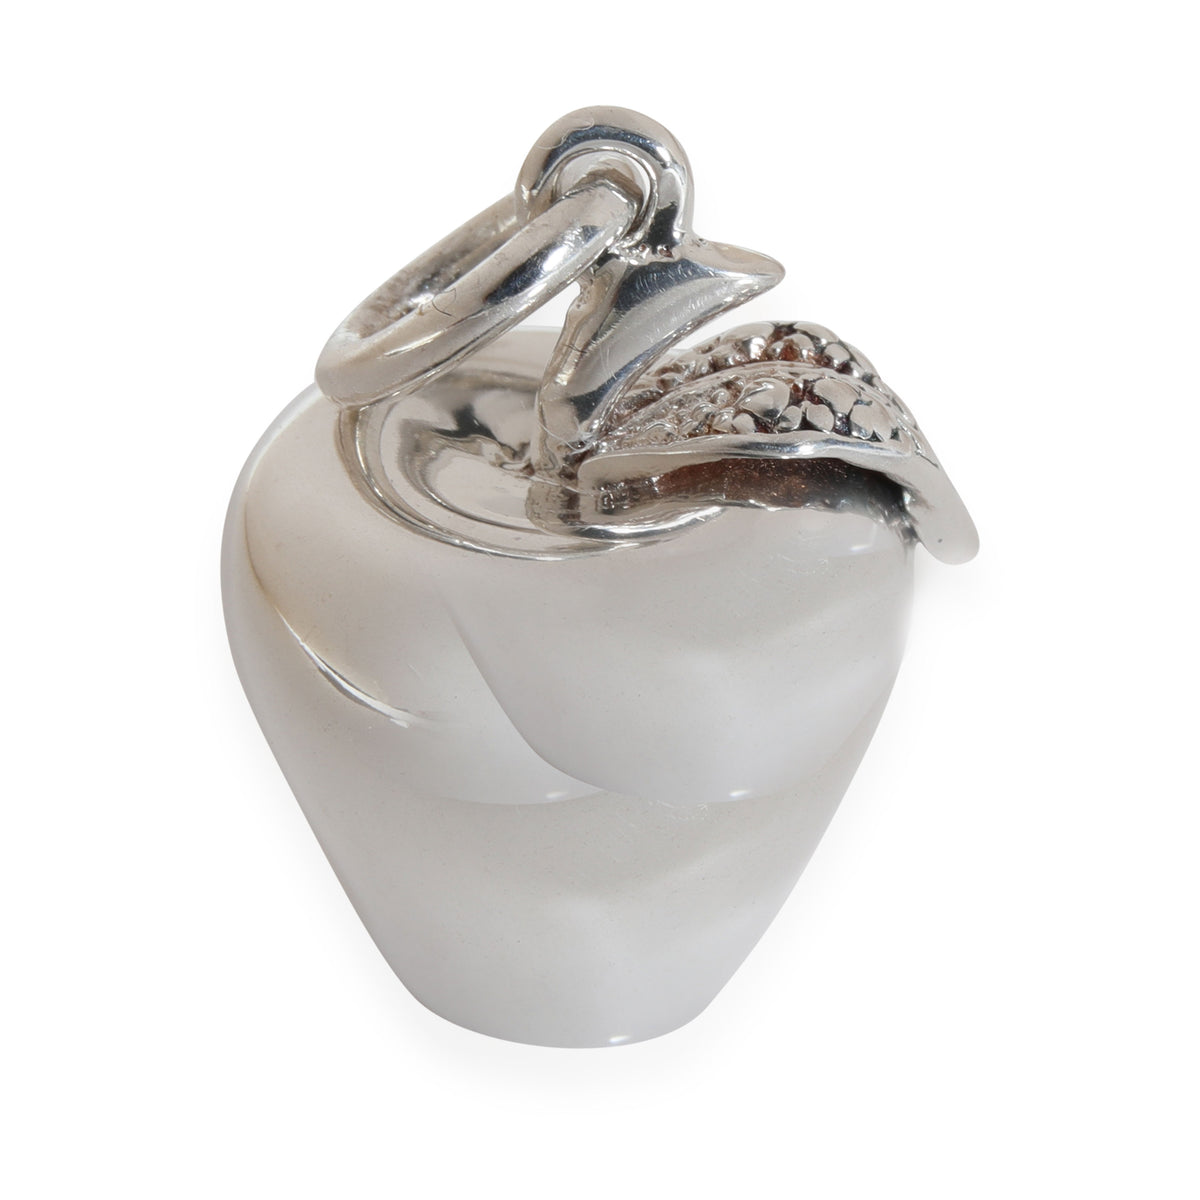 Tiffany & Co. Apple Charm in  Sterling Silver